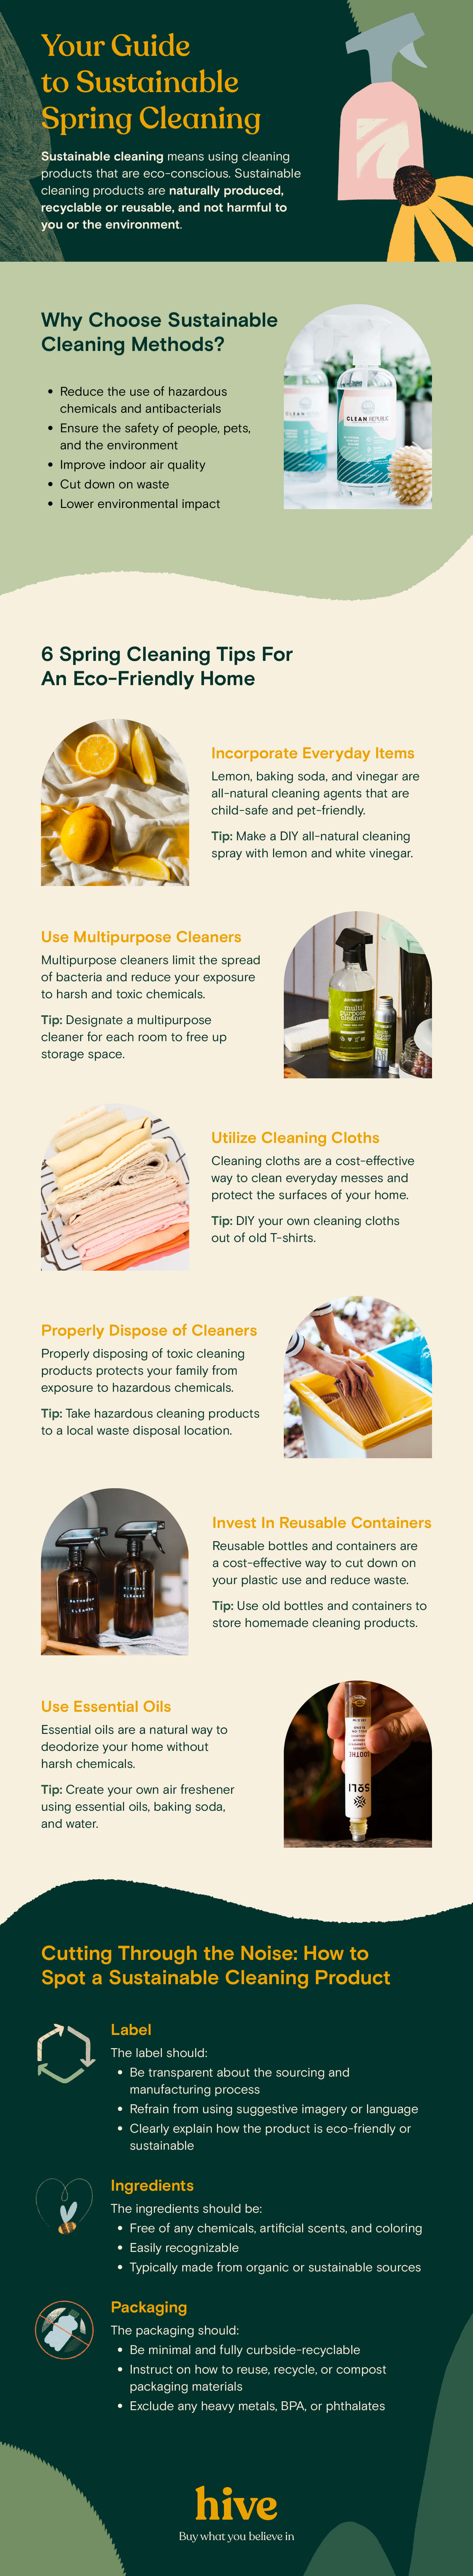 sustainable spring cleaning